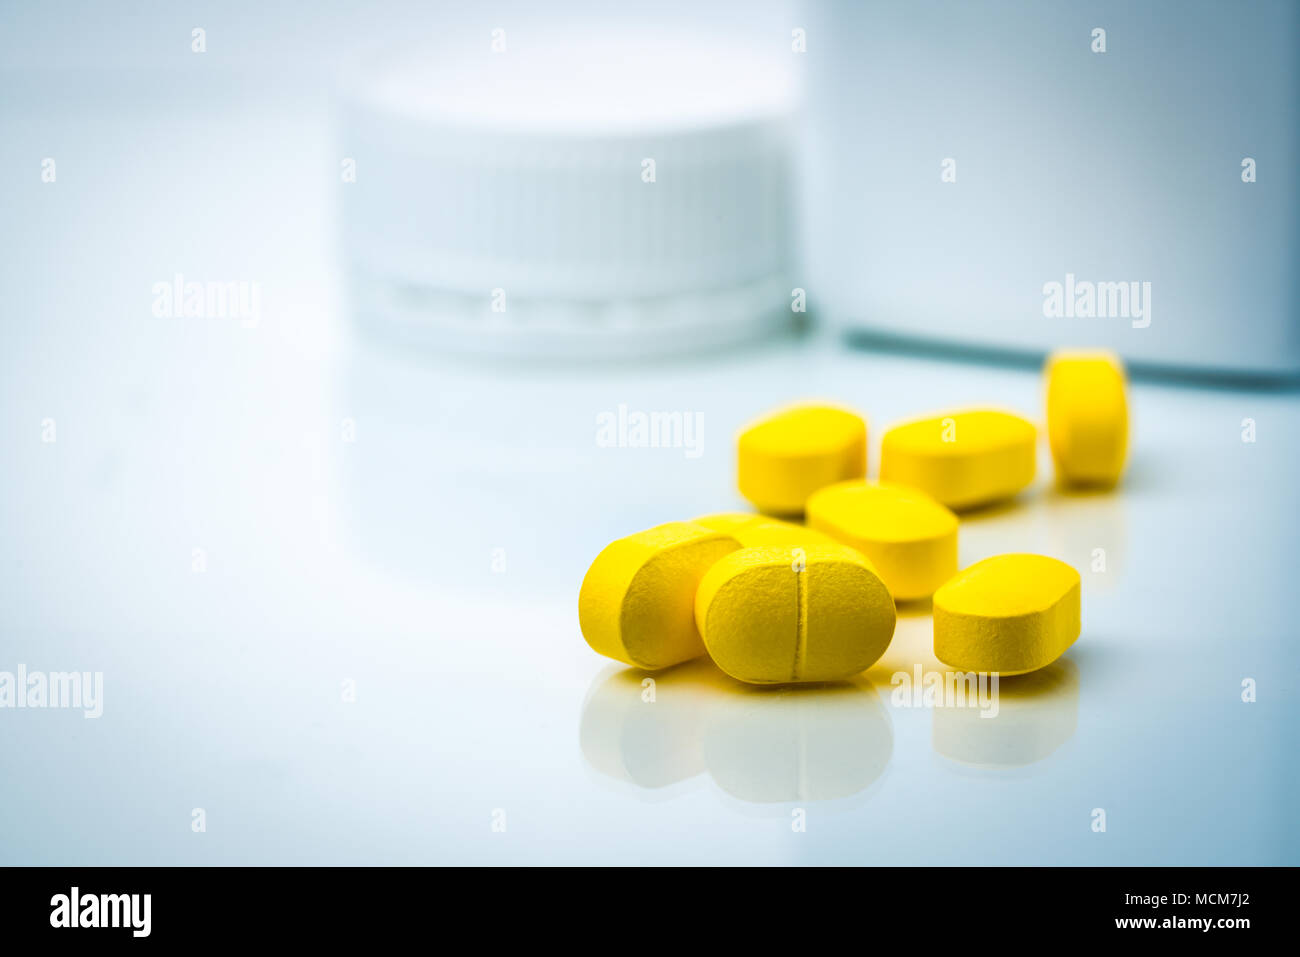 Download Pile Of Yellow Tablets Pills On Blurred Background Of Plastic Pills Bottle With Copy Space Ibuprofen For Relief Pain Headache High Fever And Anti I Stock Photo Alamy Yellowimages Mockups